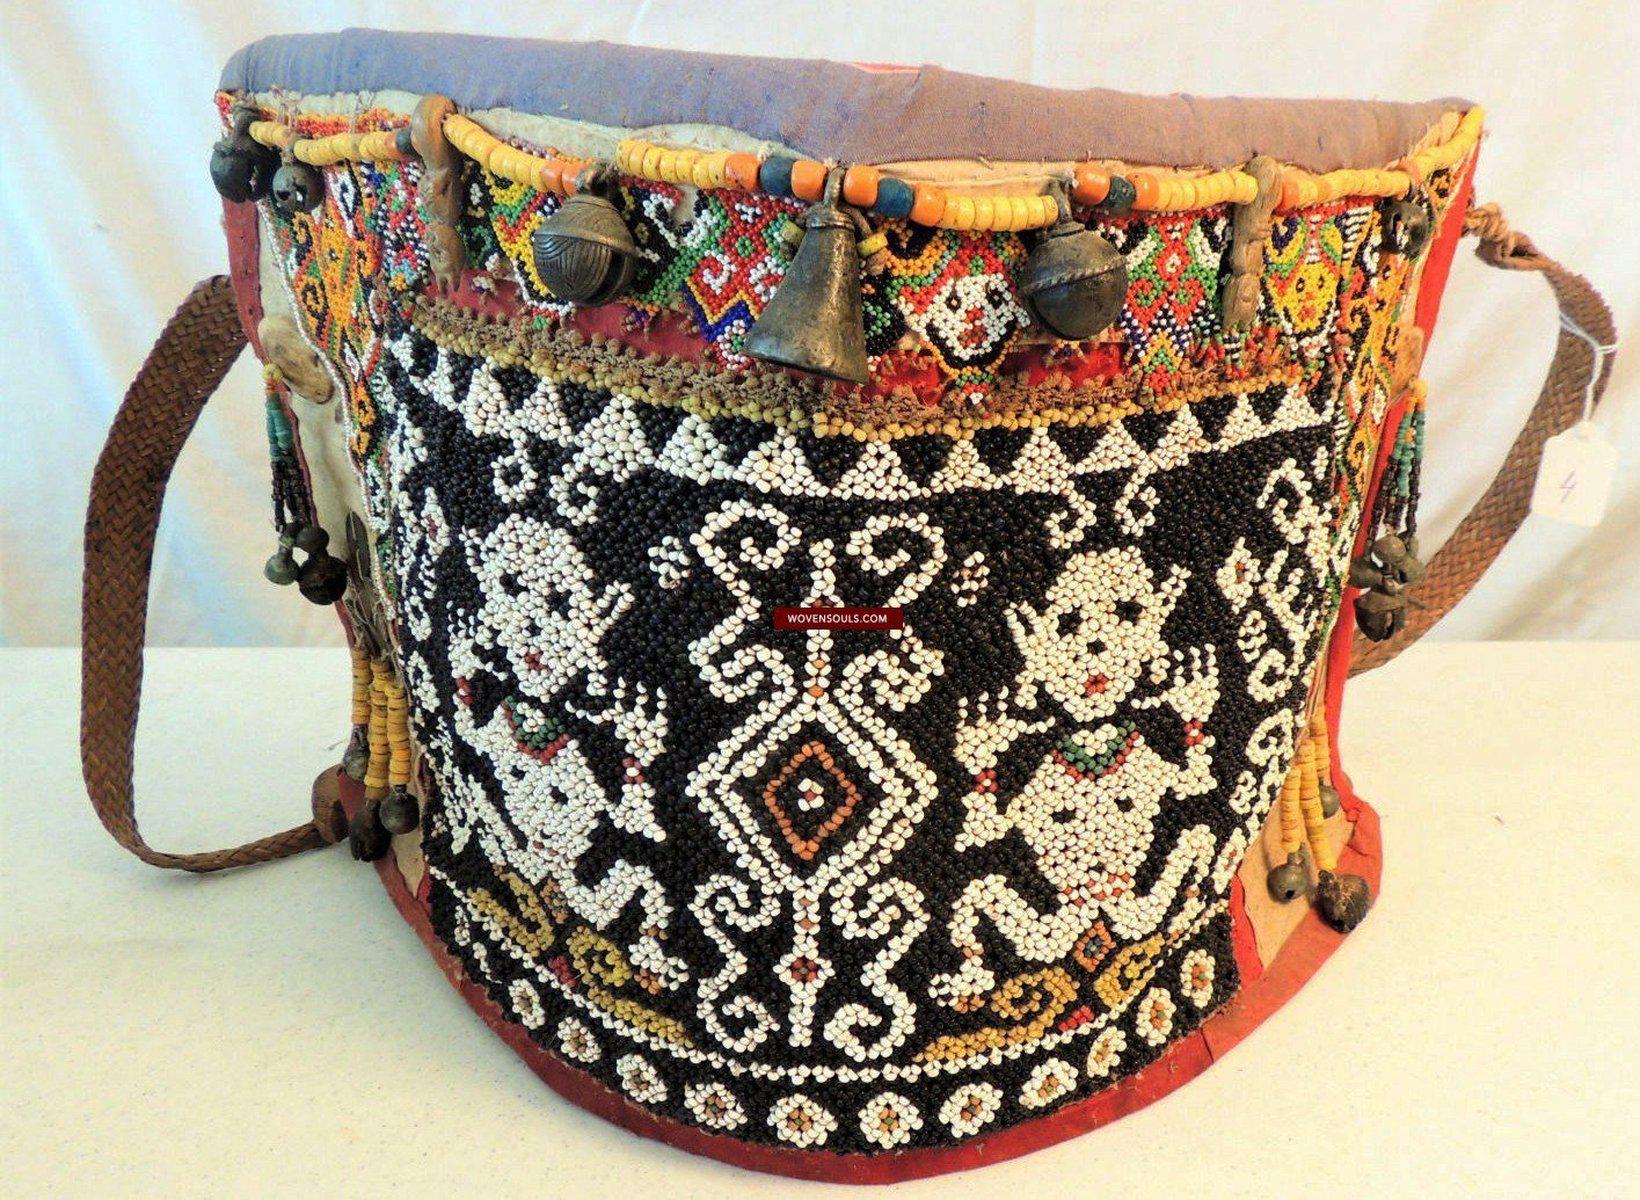 http://wovensouls.com/cdn/shop/products/986-old-beaded-dayak-baby-carrier-from-borneo.jpg?v=1633064818